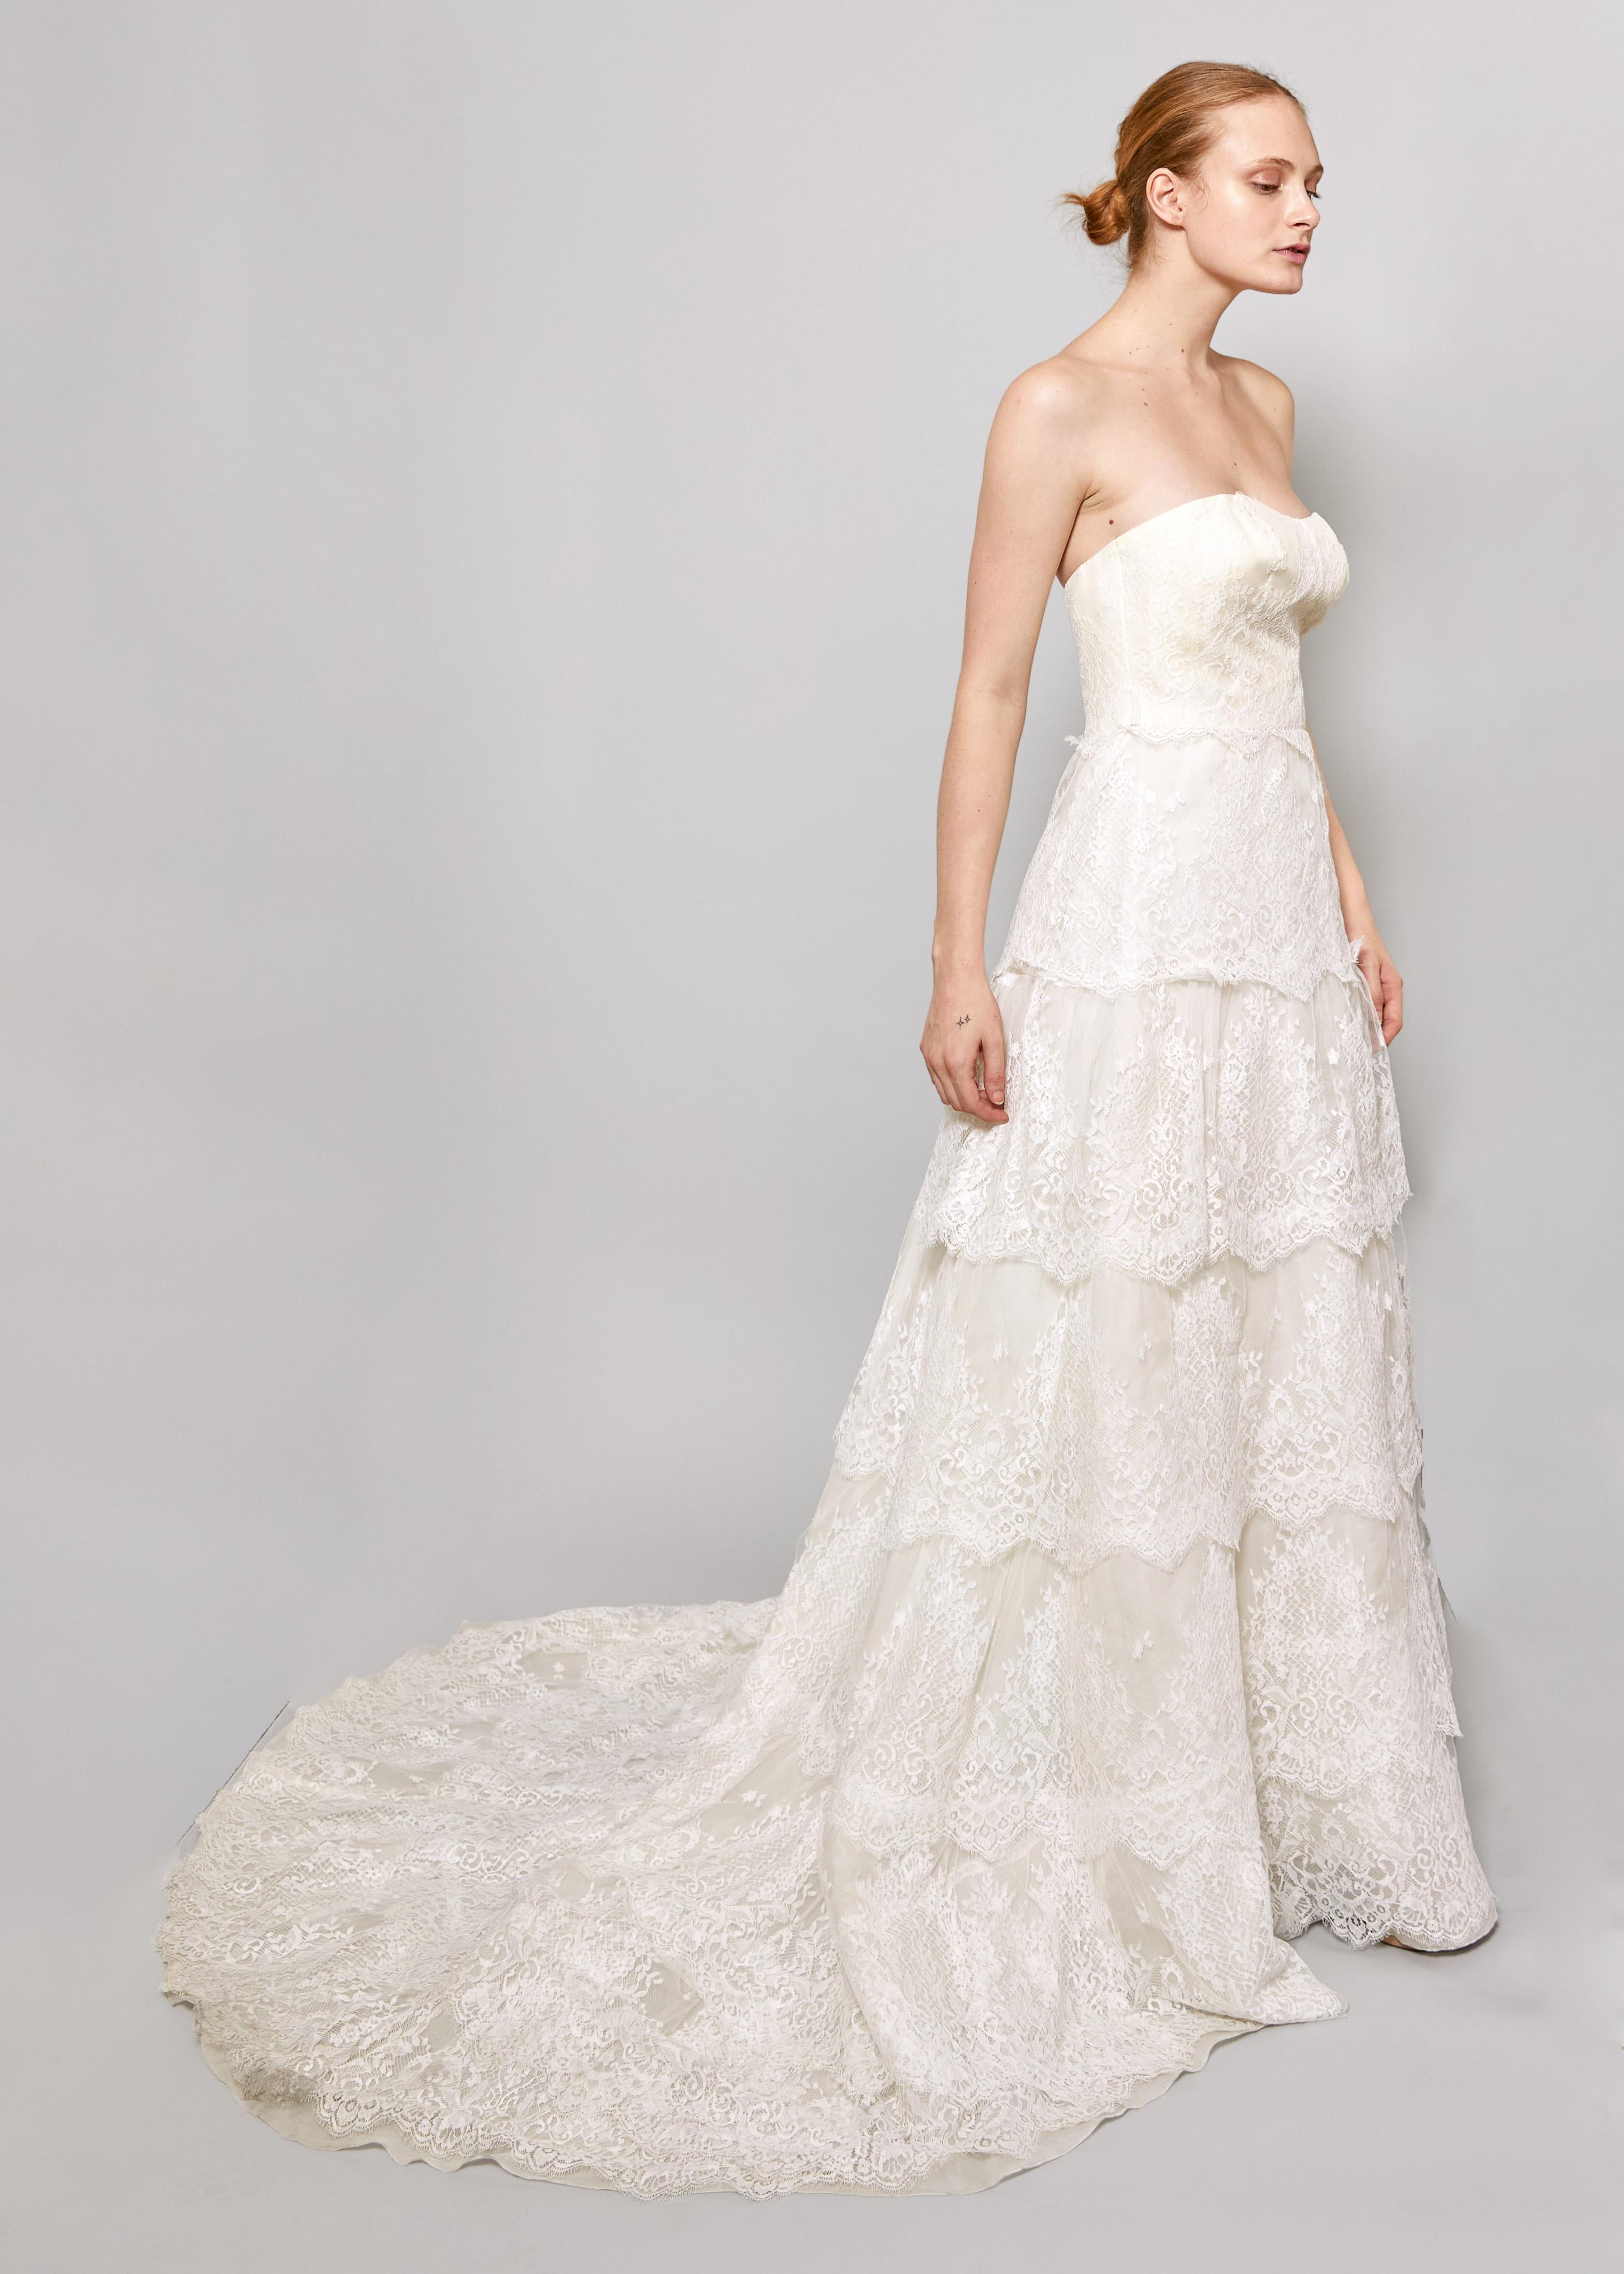 Blumarine Sposa White Lace Ruffled Gown In Excellent Condition For Sale In Los Angeles, CA